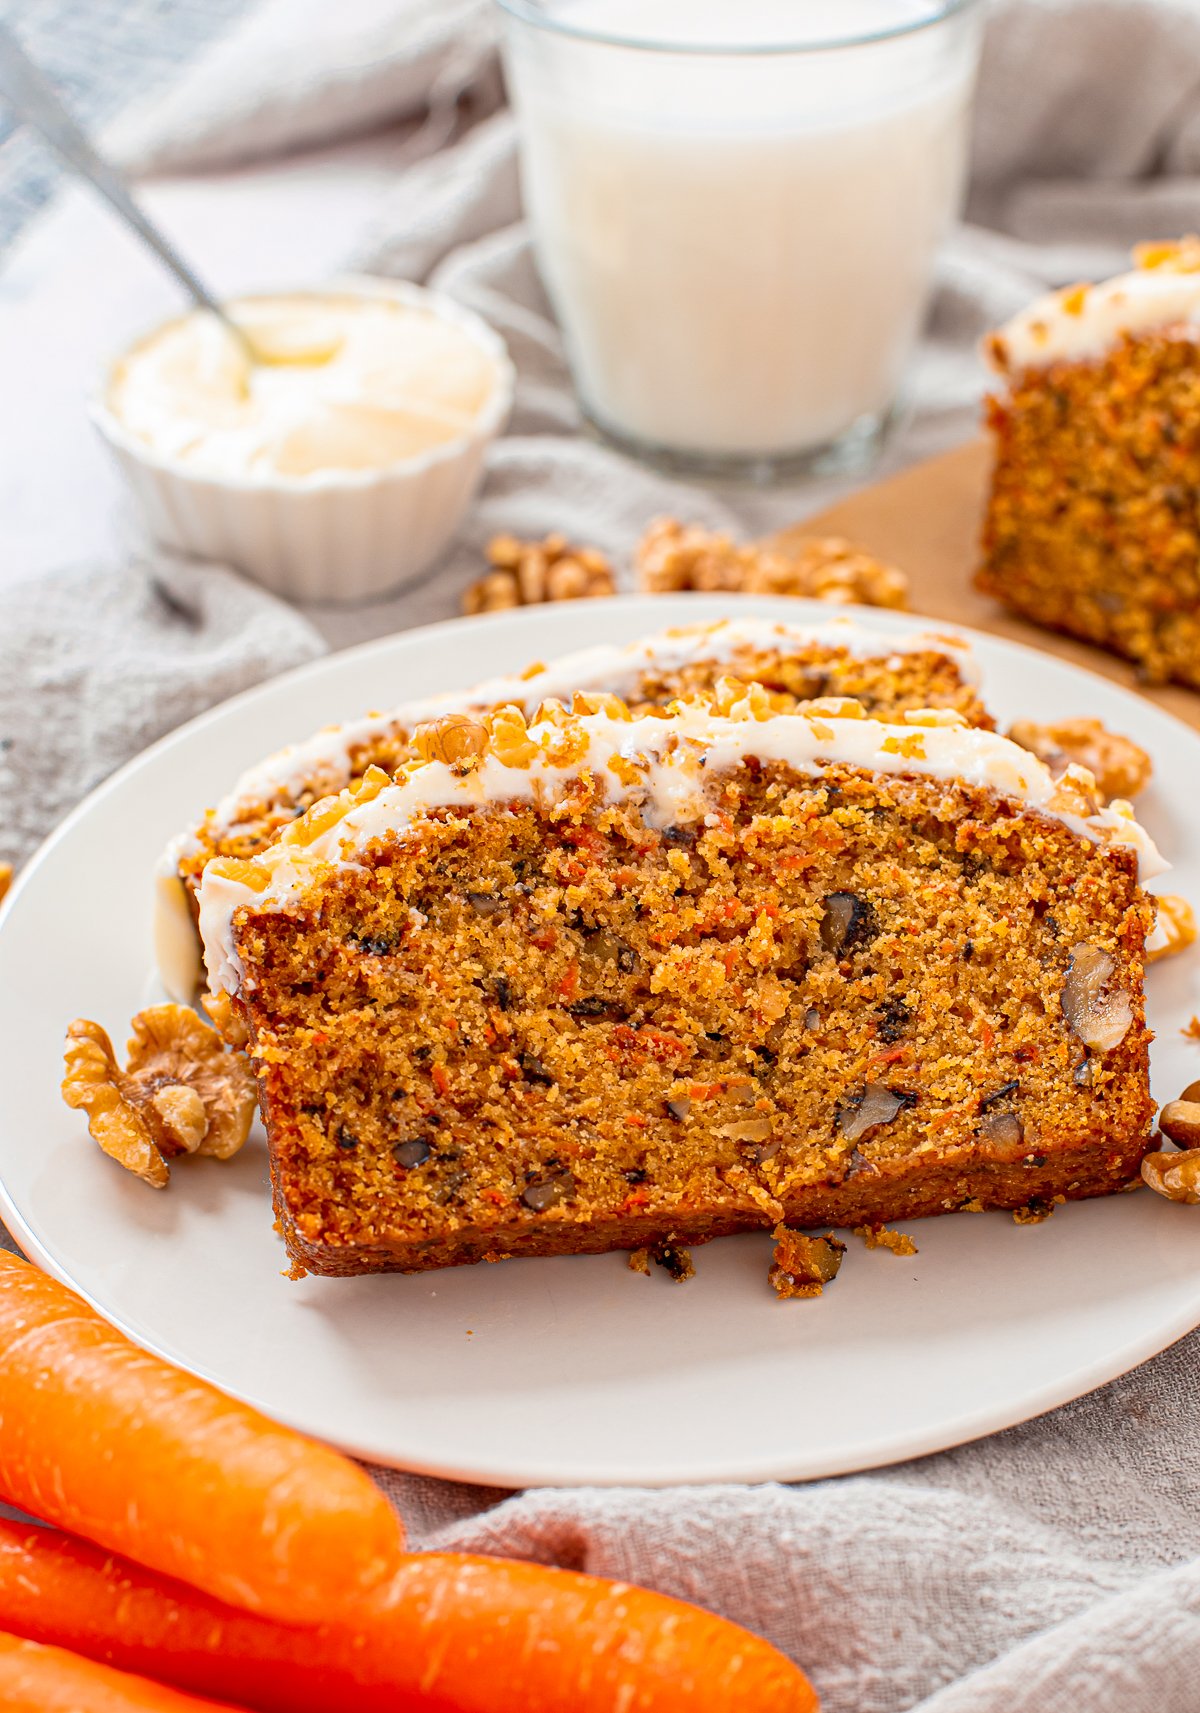 Two slices of the Carrot Loaf Cake on white plate.